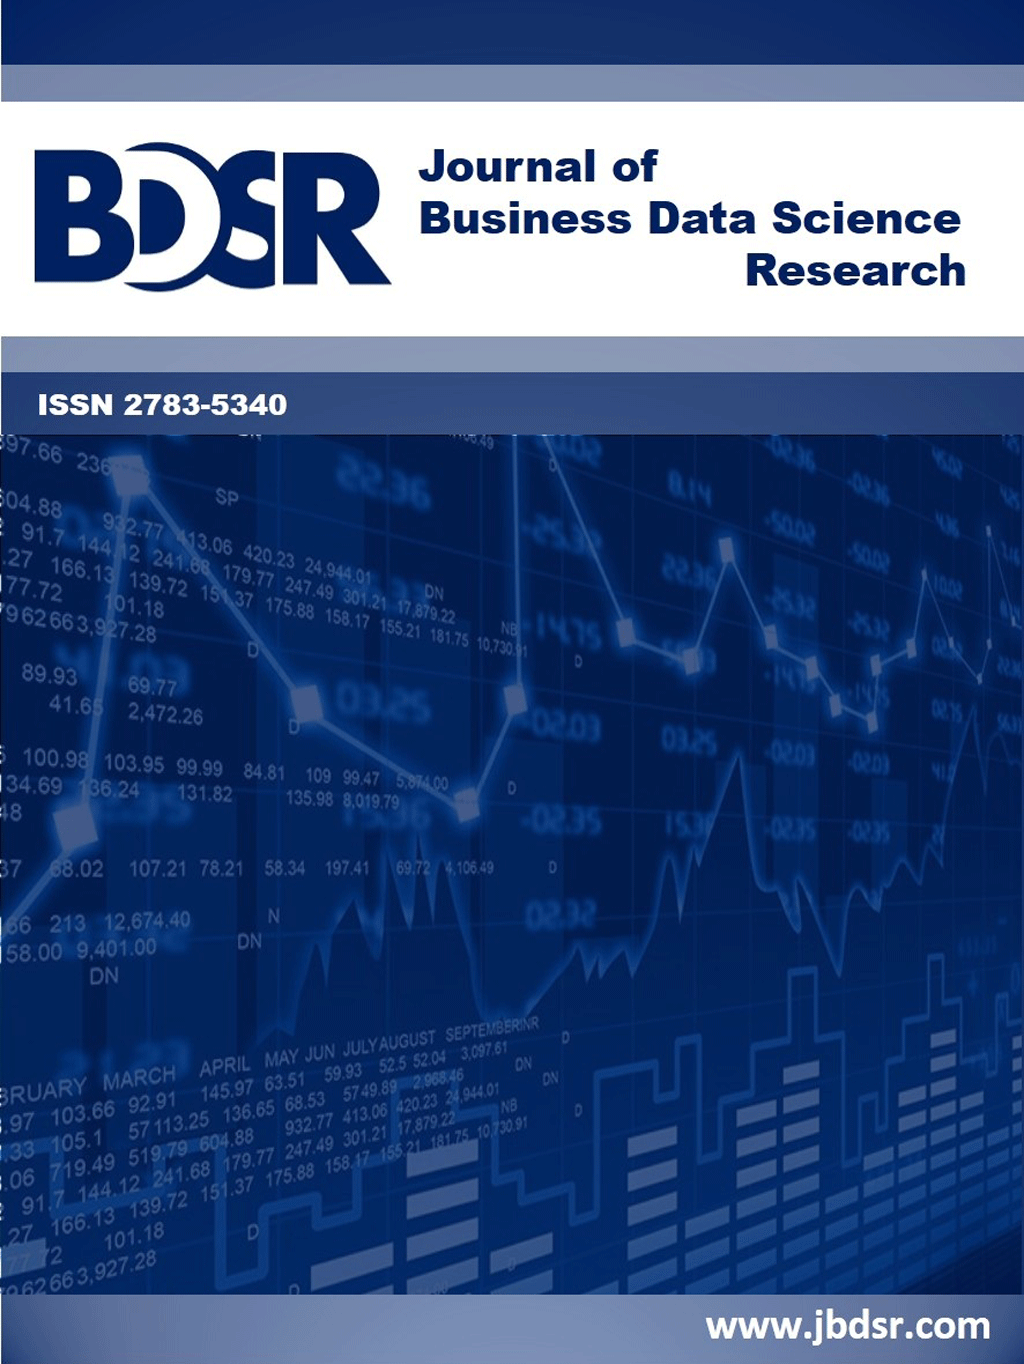 Business Data Science Research - Summer and Autumn 2021, Volume 1 - Number 1